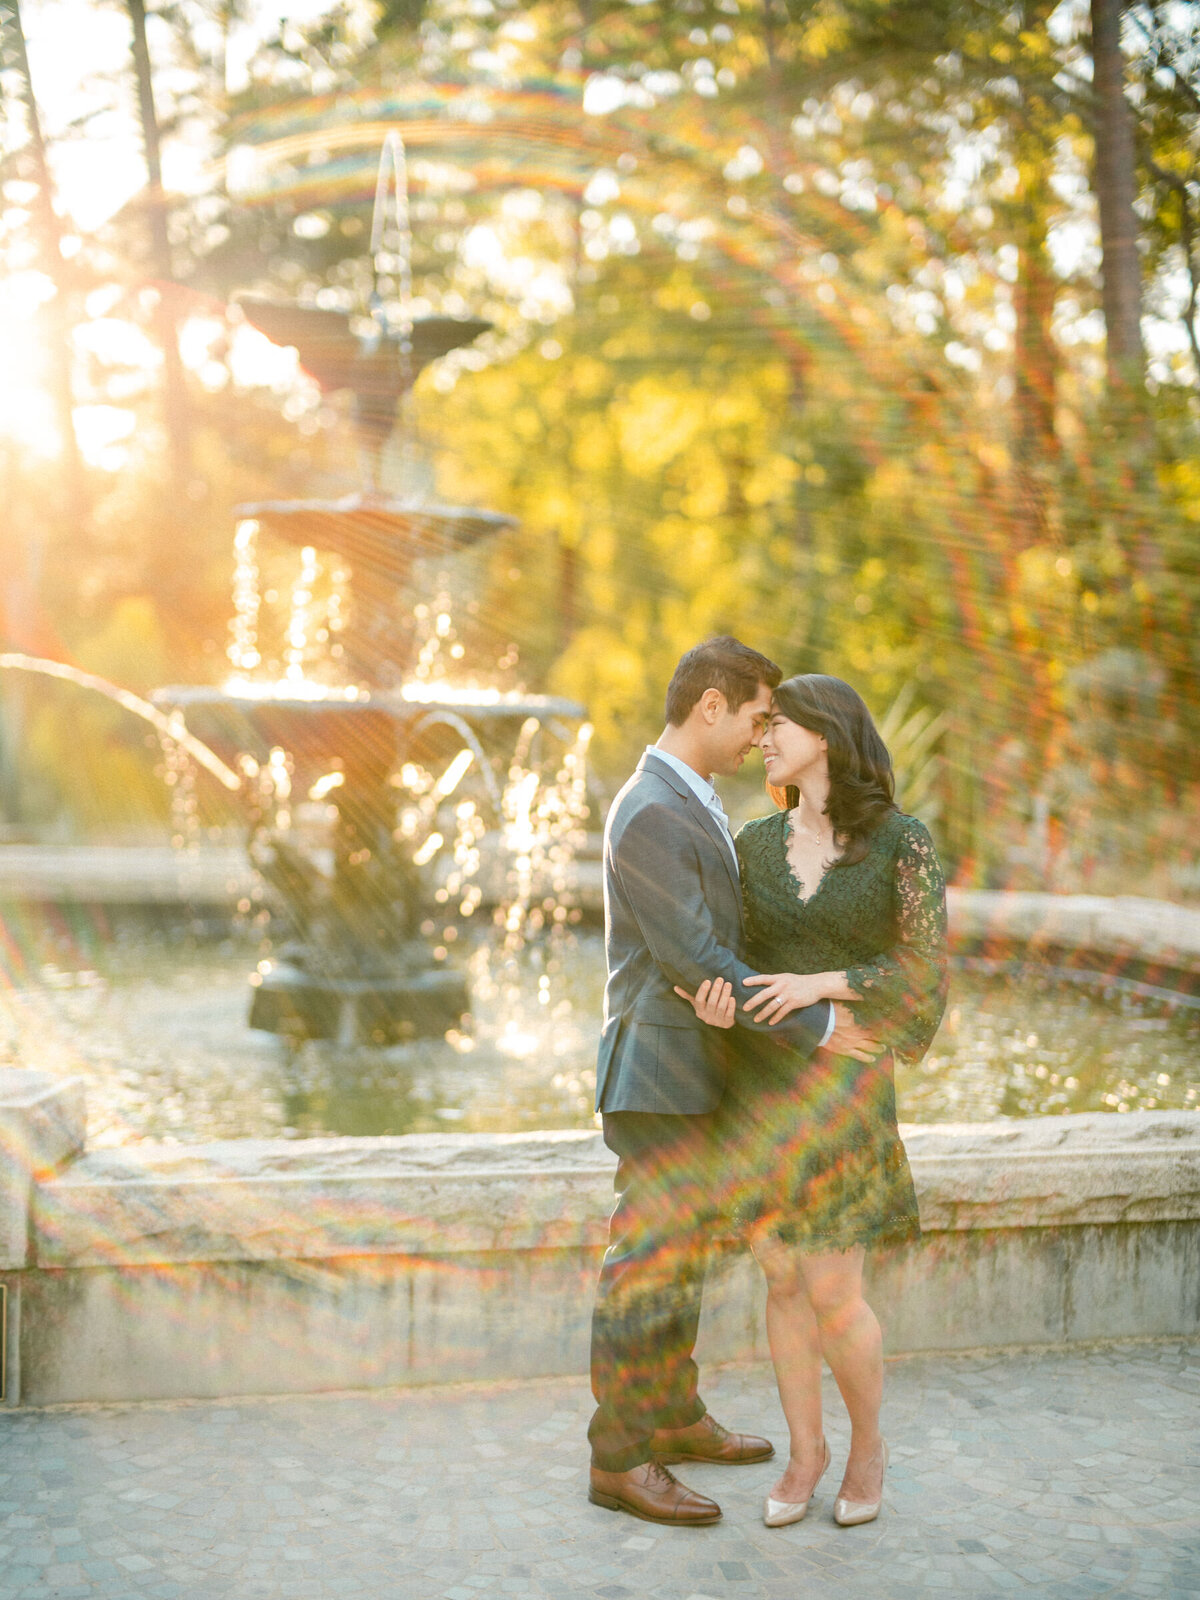 A couple embraced in front of a fountain, the setting sun casting a golden light and water reflections around them.